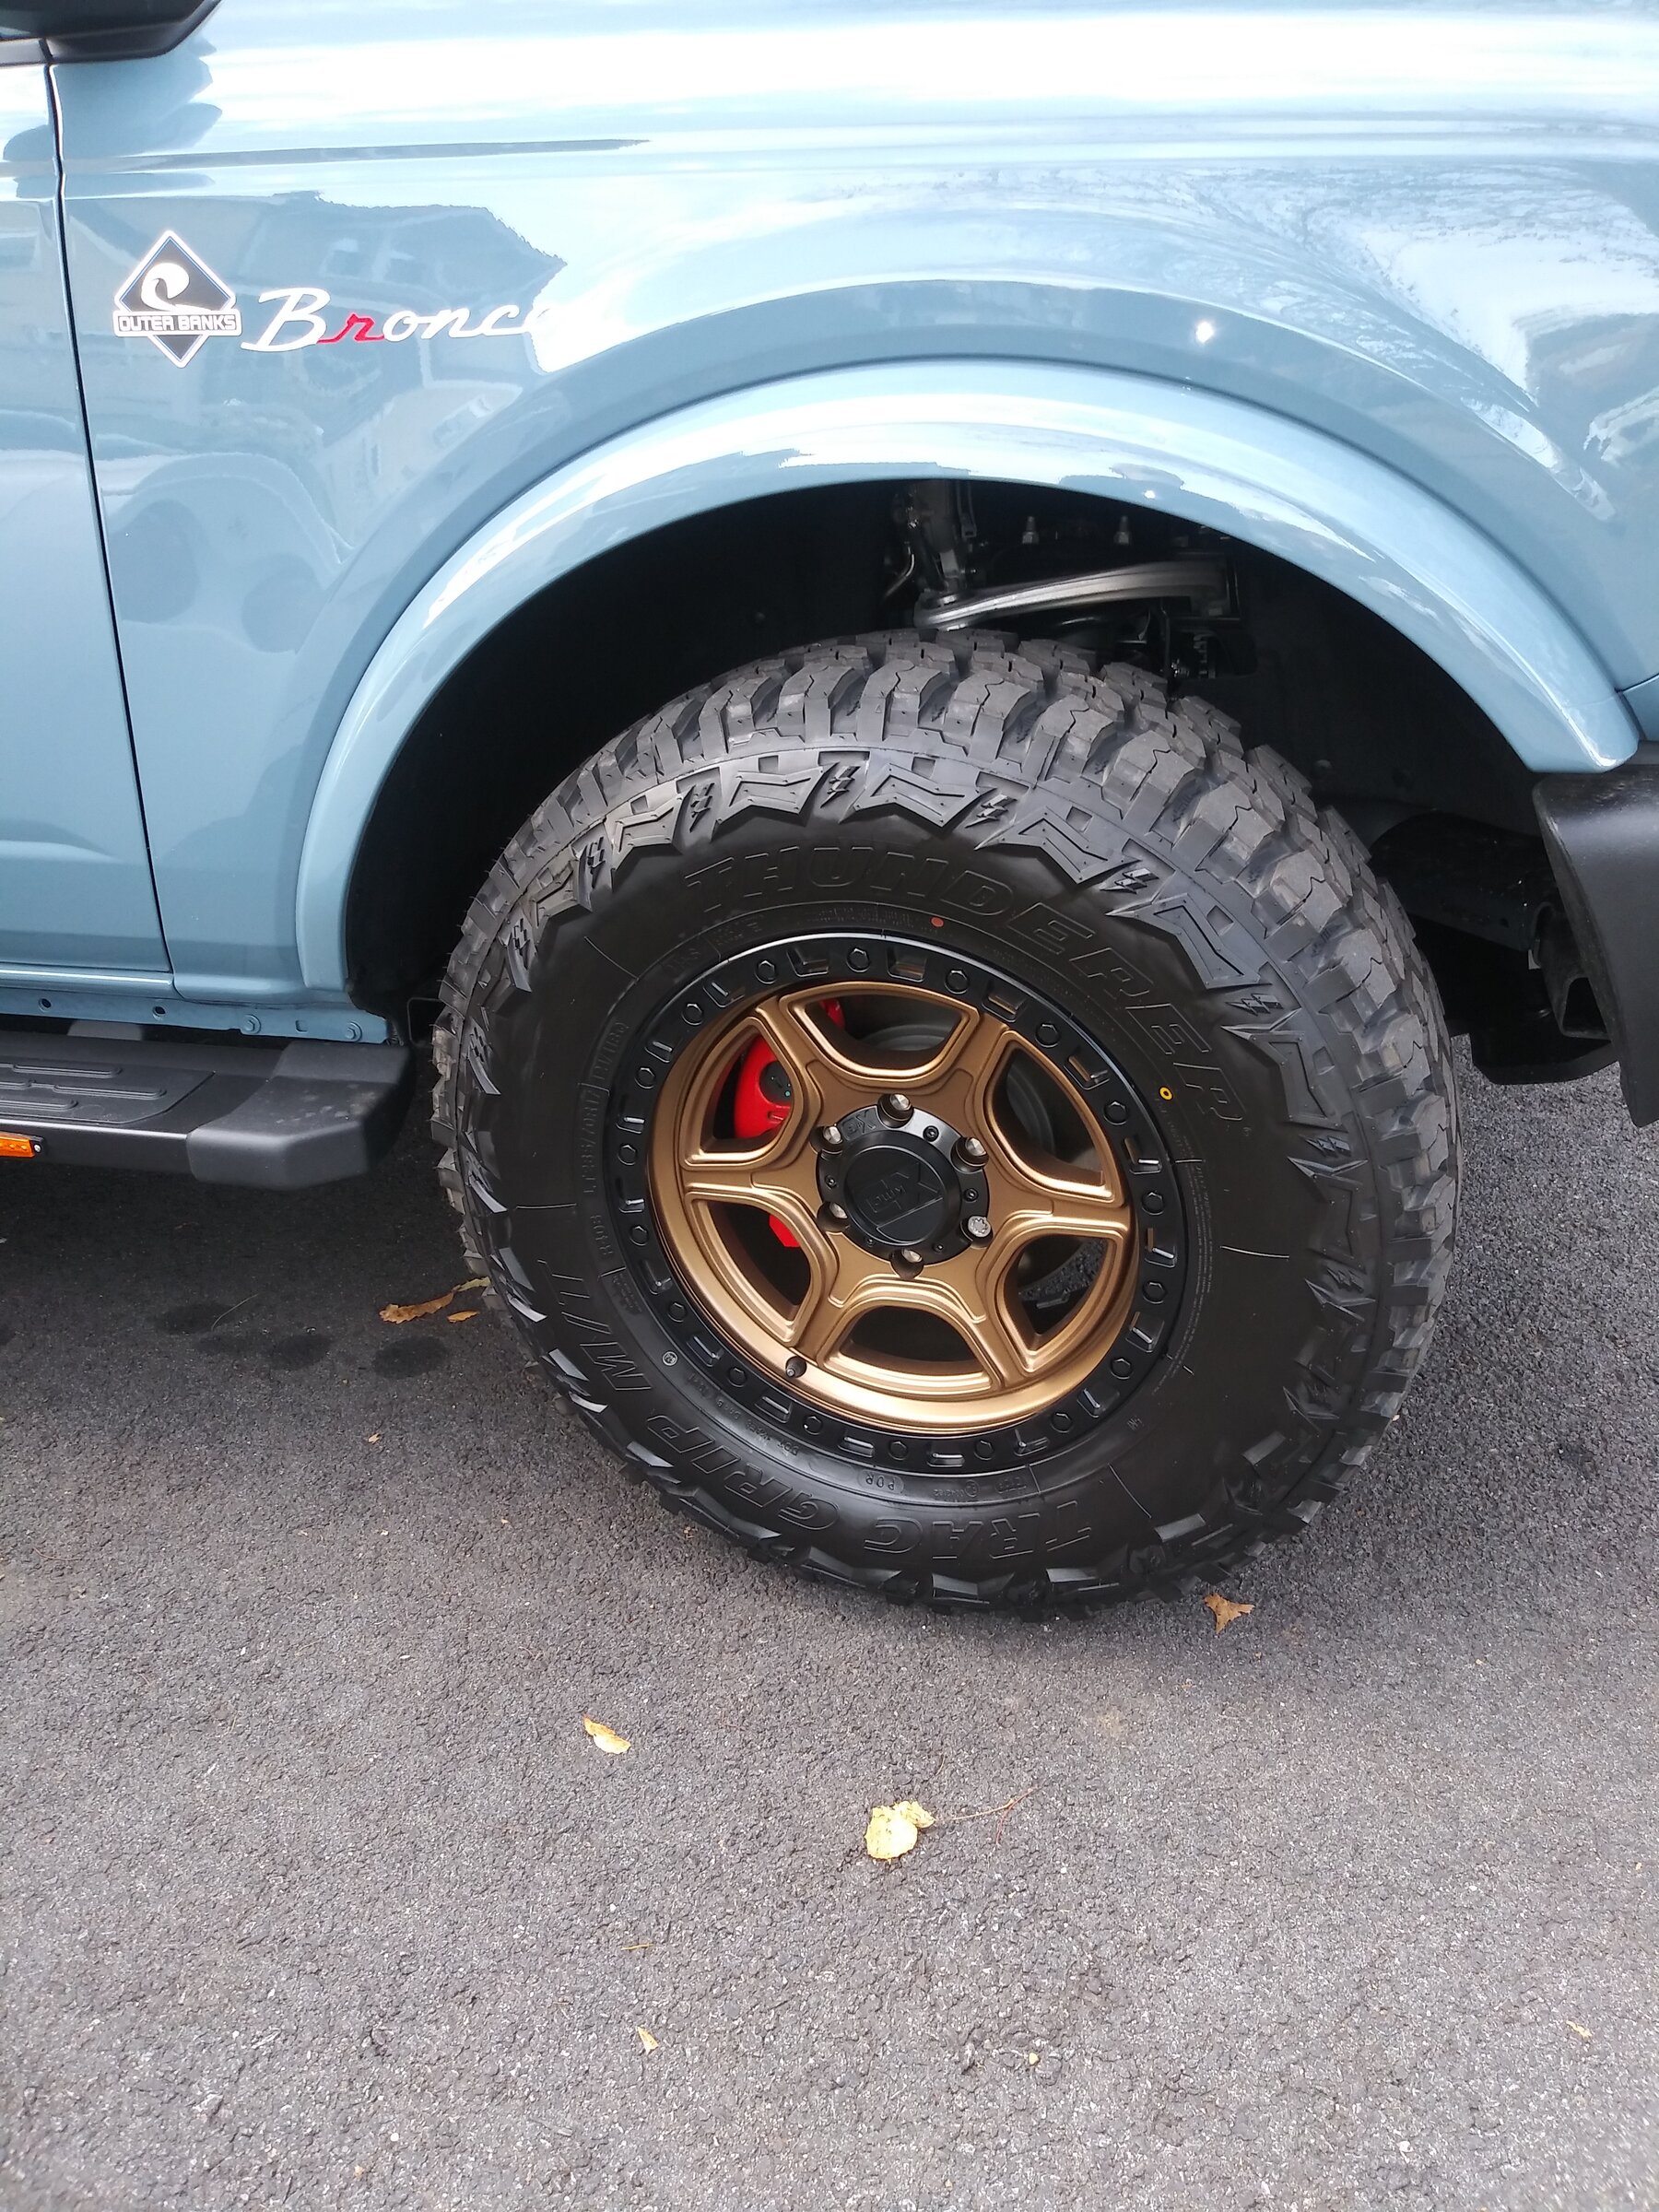 Ford Bronco Show us your installed wheel / tire upgrades here! (Pics) 20211216_140530